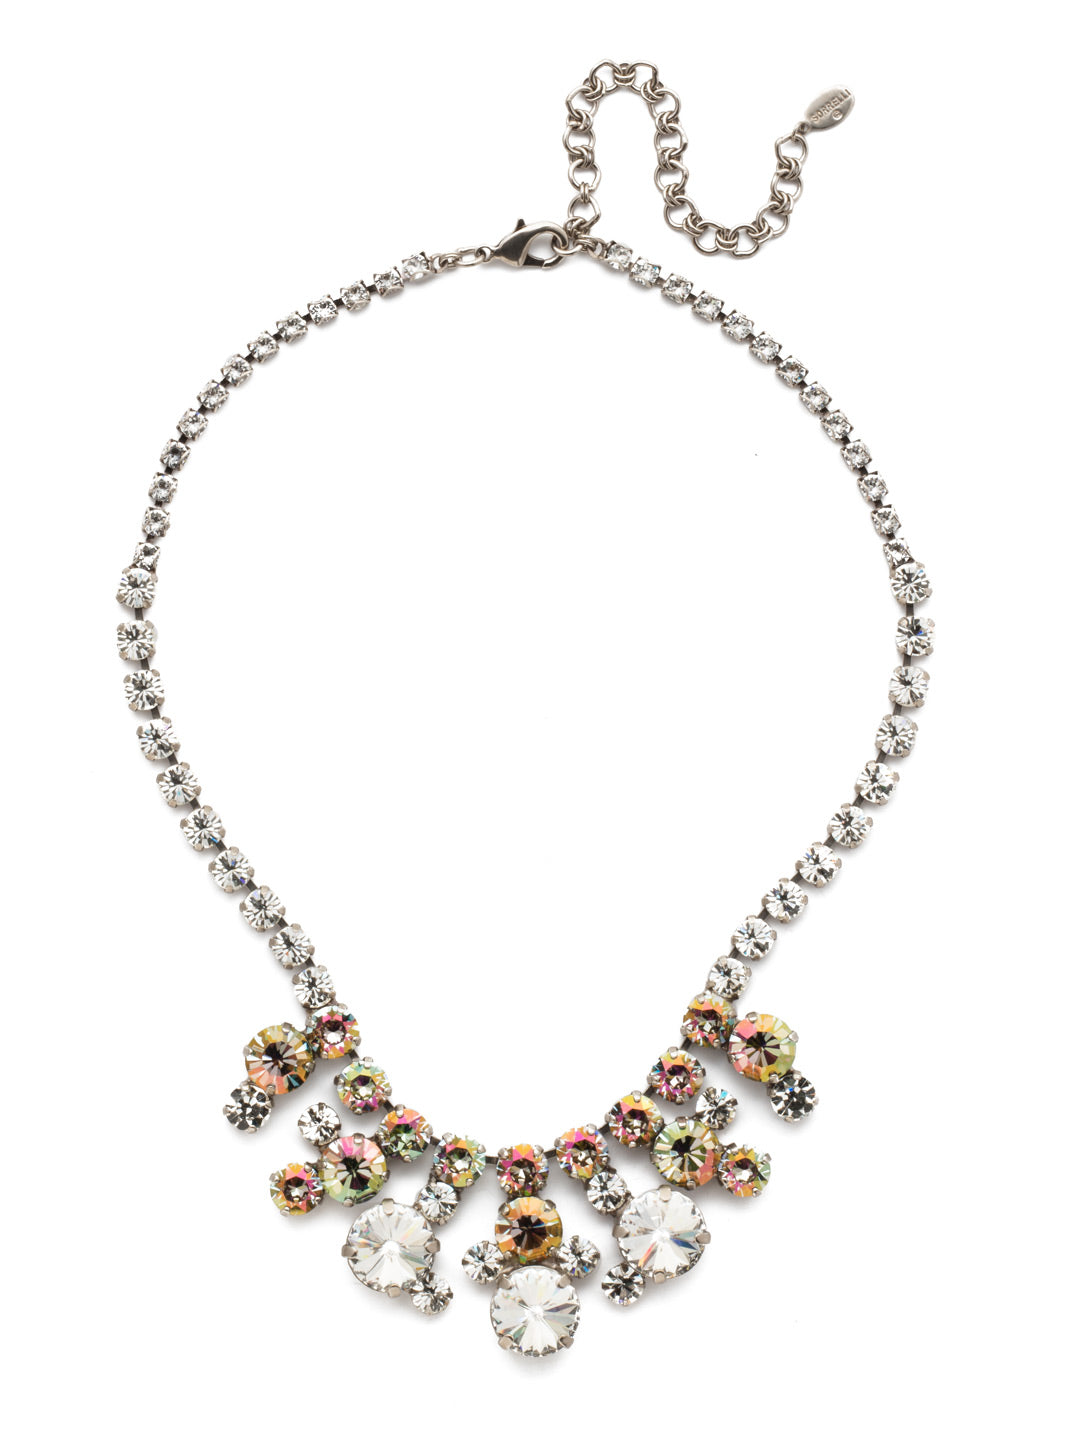 Danielle Statement Necklace - NEP21ASCRE - <p>Stunning two-tone crystals combine in the Danielle Statement Necklace. Dark then light, round stones give way to drips of even larger show-stoppers that demand attention. From Sorrelli's Crystal Envy collection in our Antique Silver-tone finish.</p>